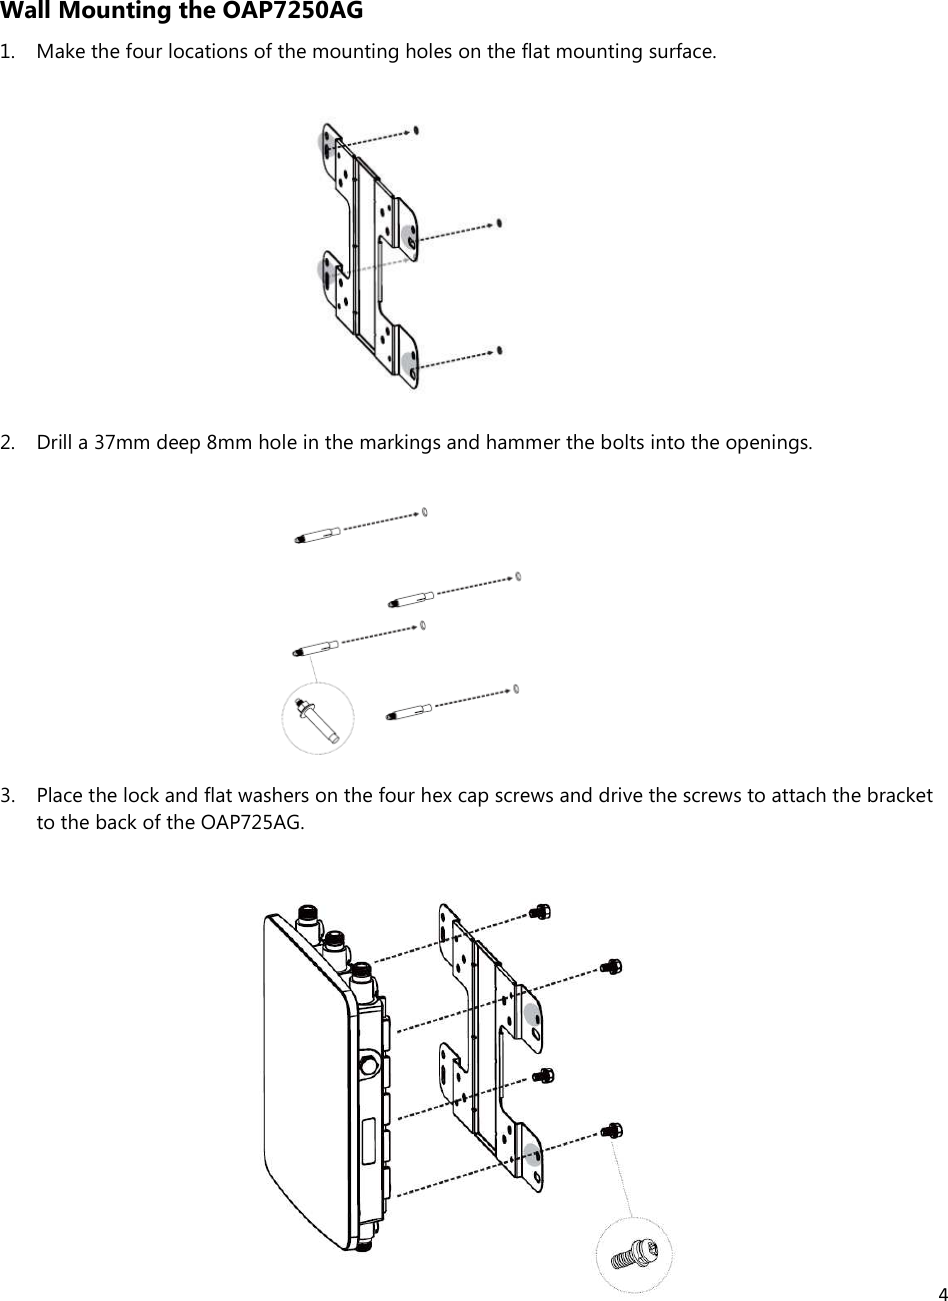 4  Wall Mounting the OAP7250AG 1. Make the four locations of the mounting holes on the flat mounting surface.          2. Drill a 37mm deep 8mm hole in the markings and hammer the bolts into the openings.         3. Place the lock and flat washers on the four hex cap screws and drive the screws to attach the bracket to the back of the OAP725AG.            